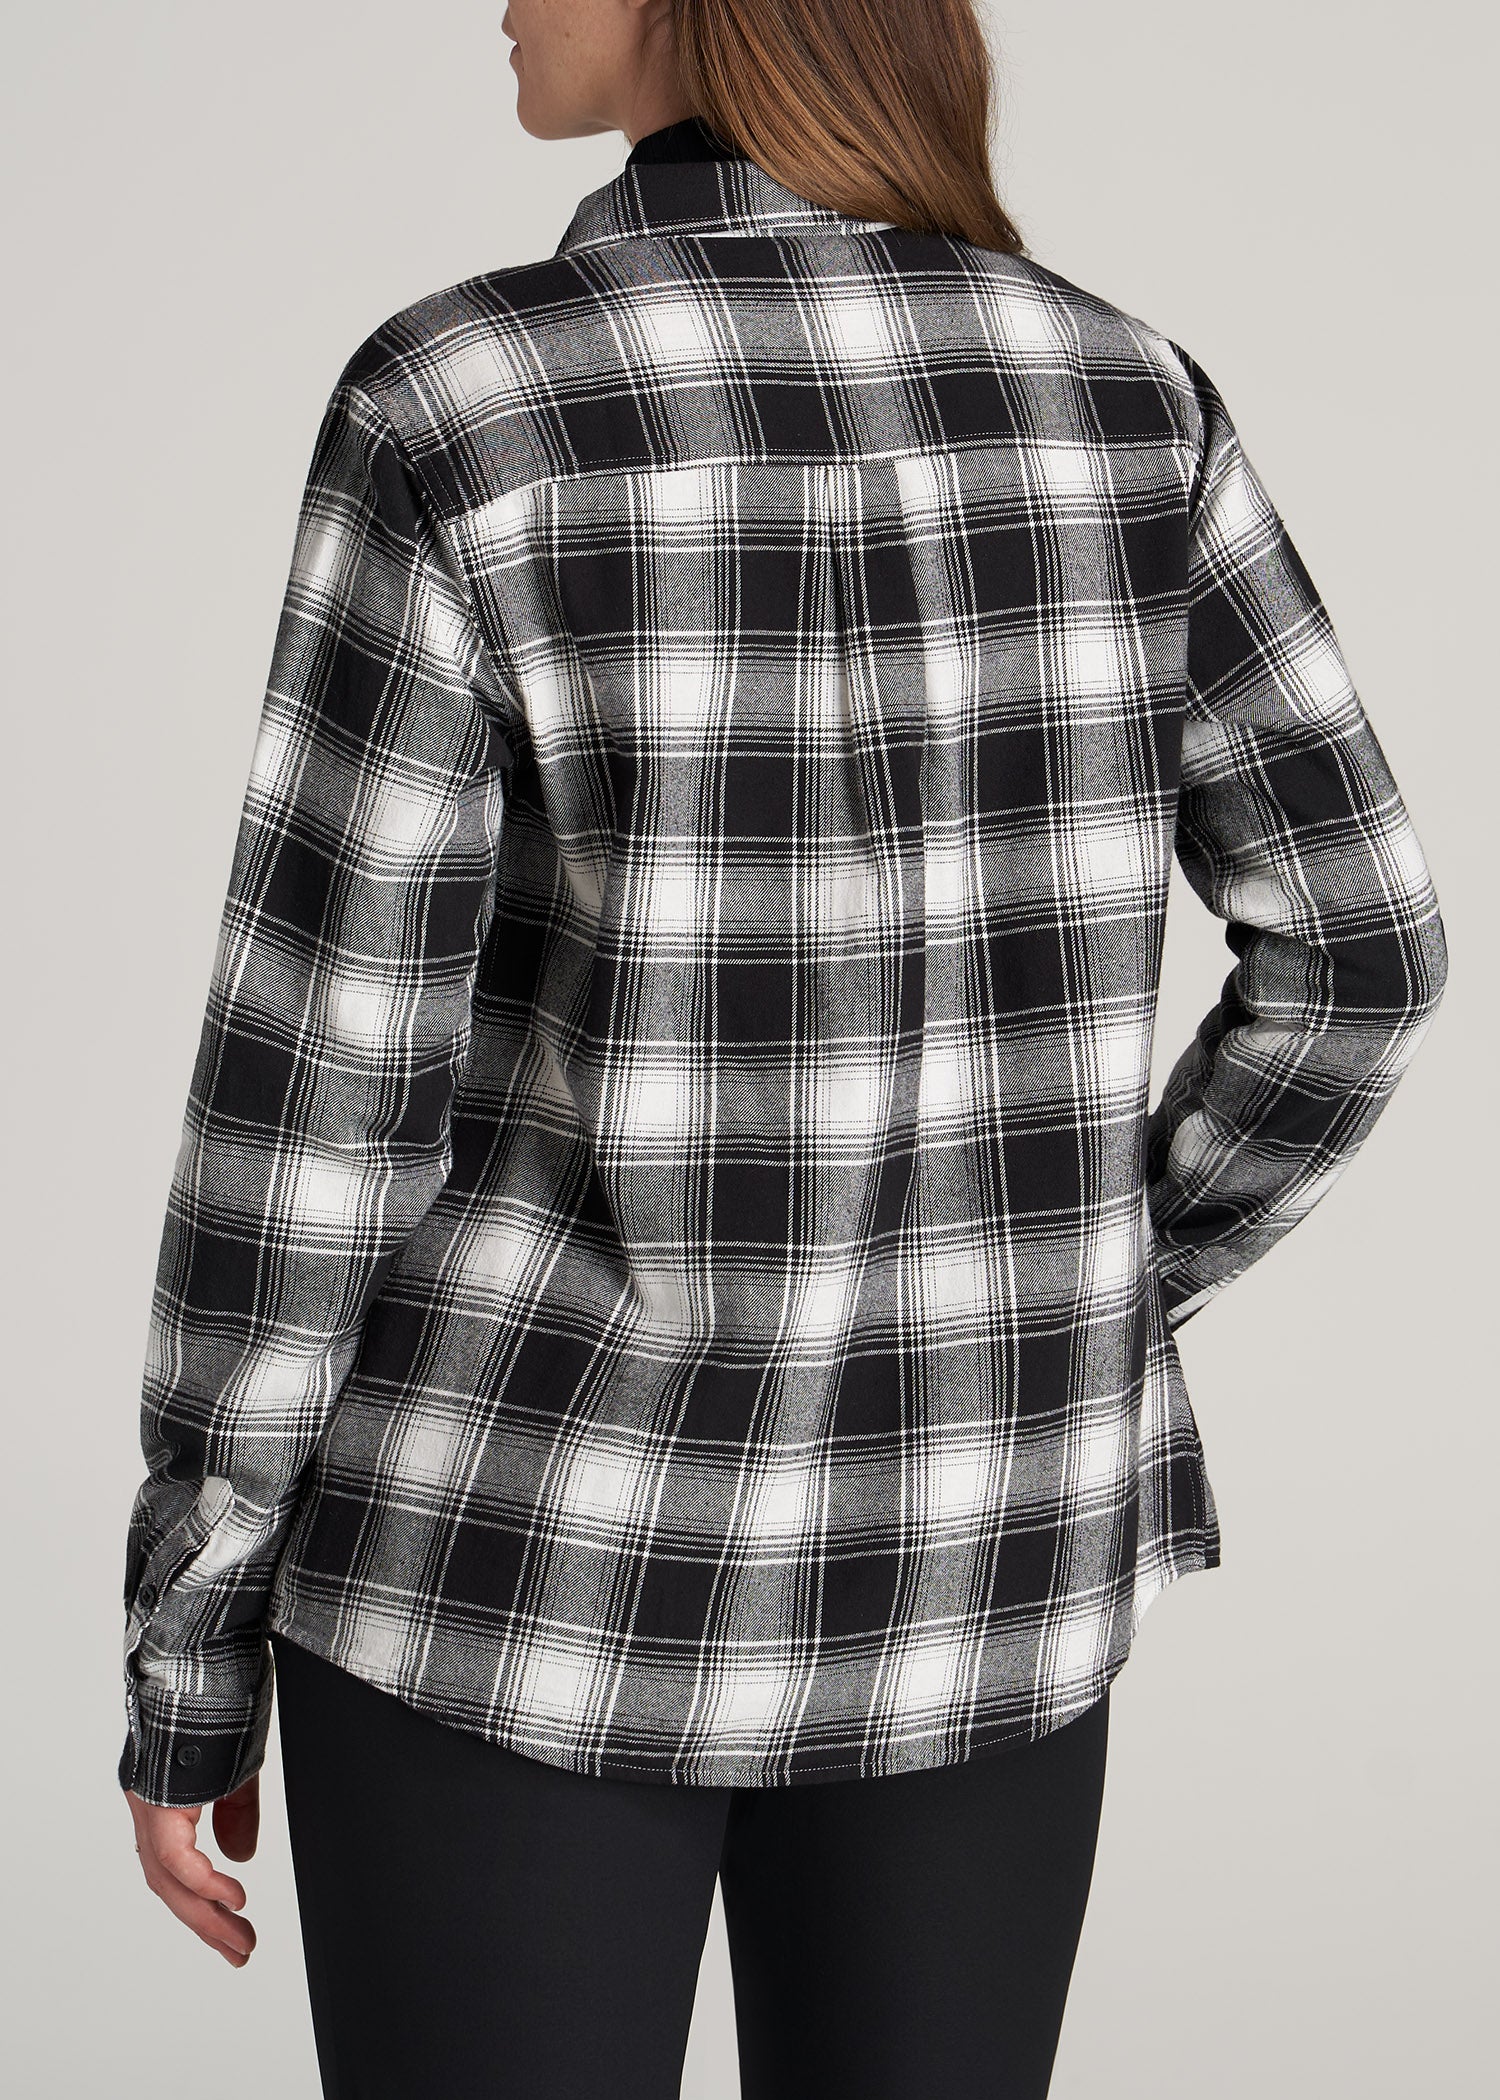 Flannel Button-Up Shirt for Tall Women in Black & White Plaid